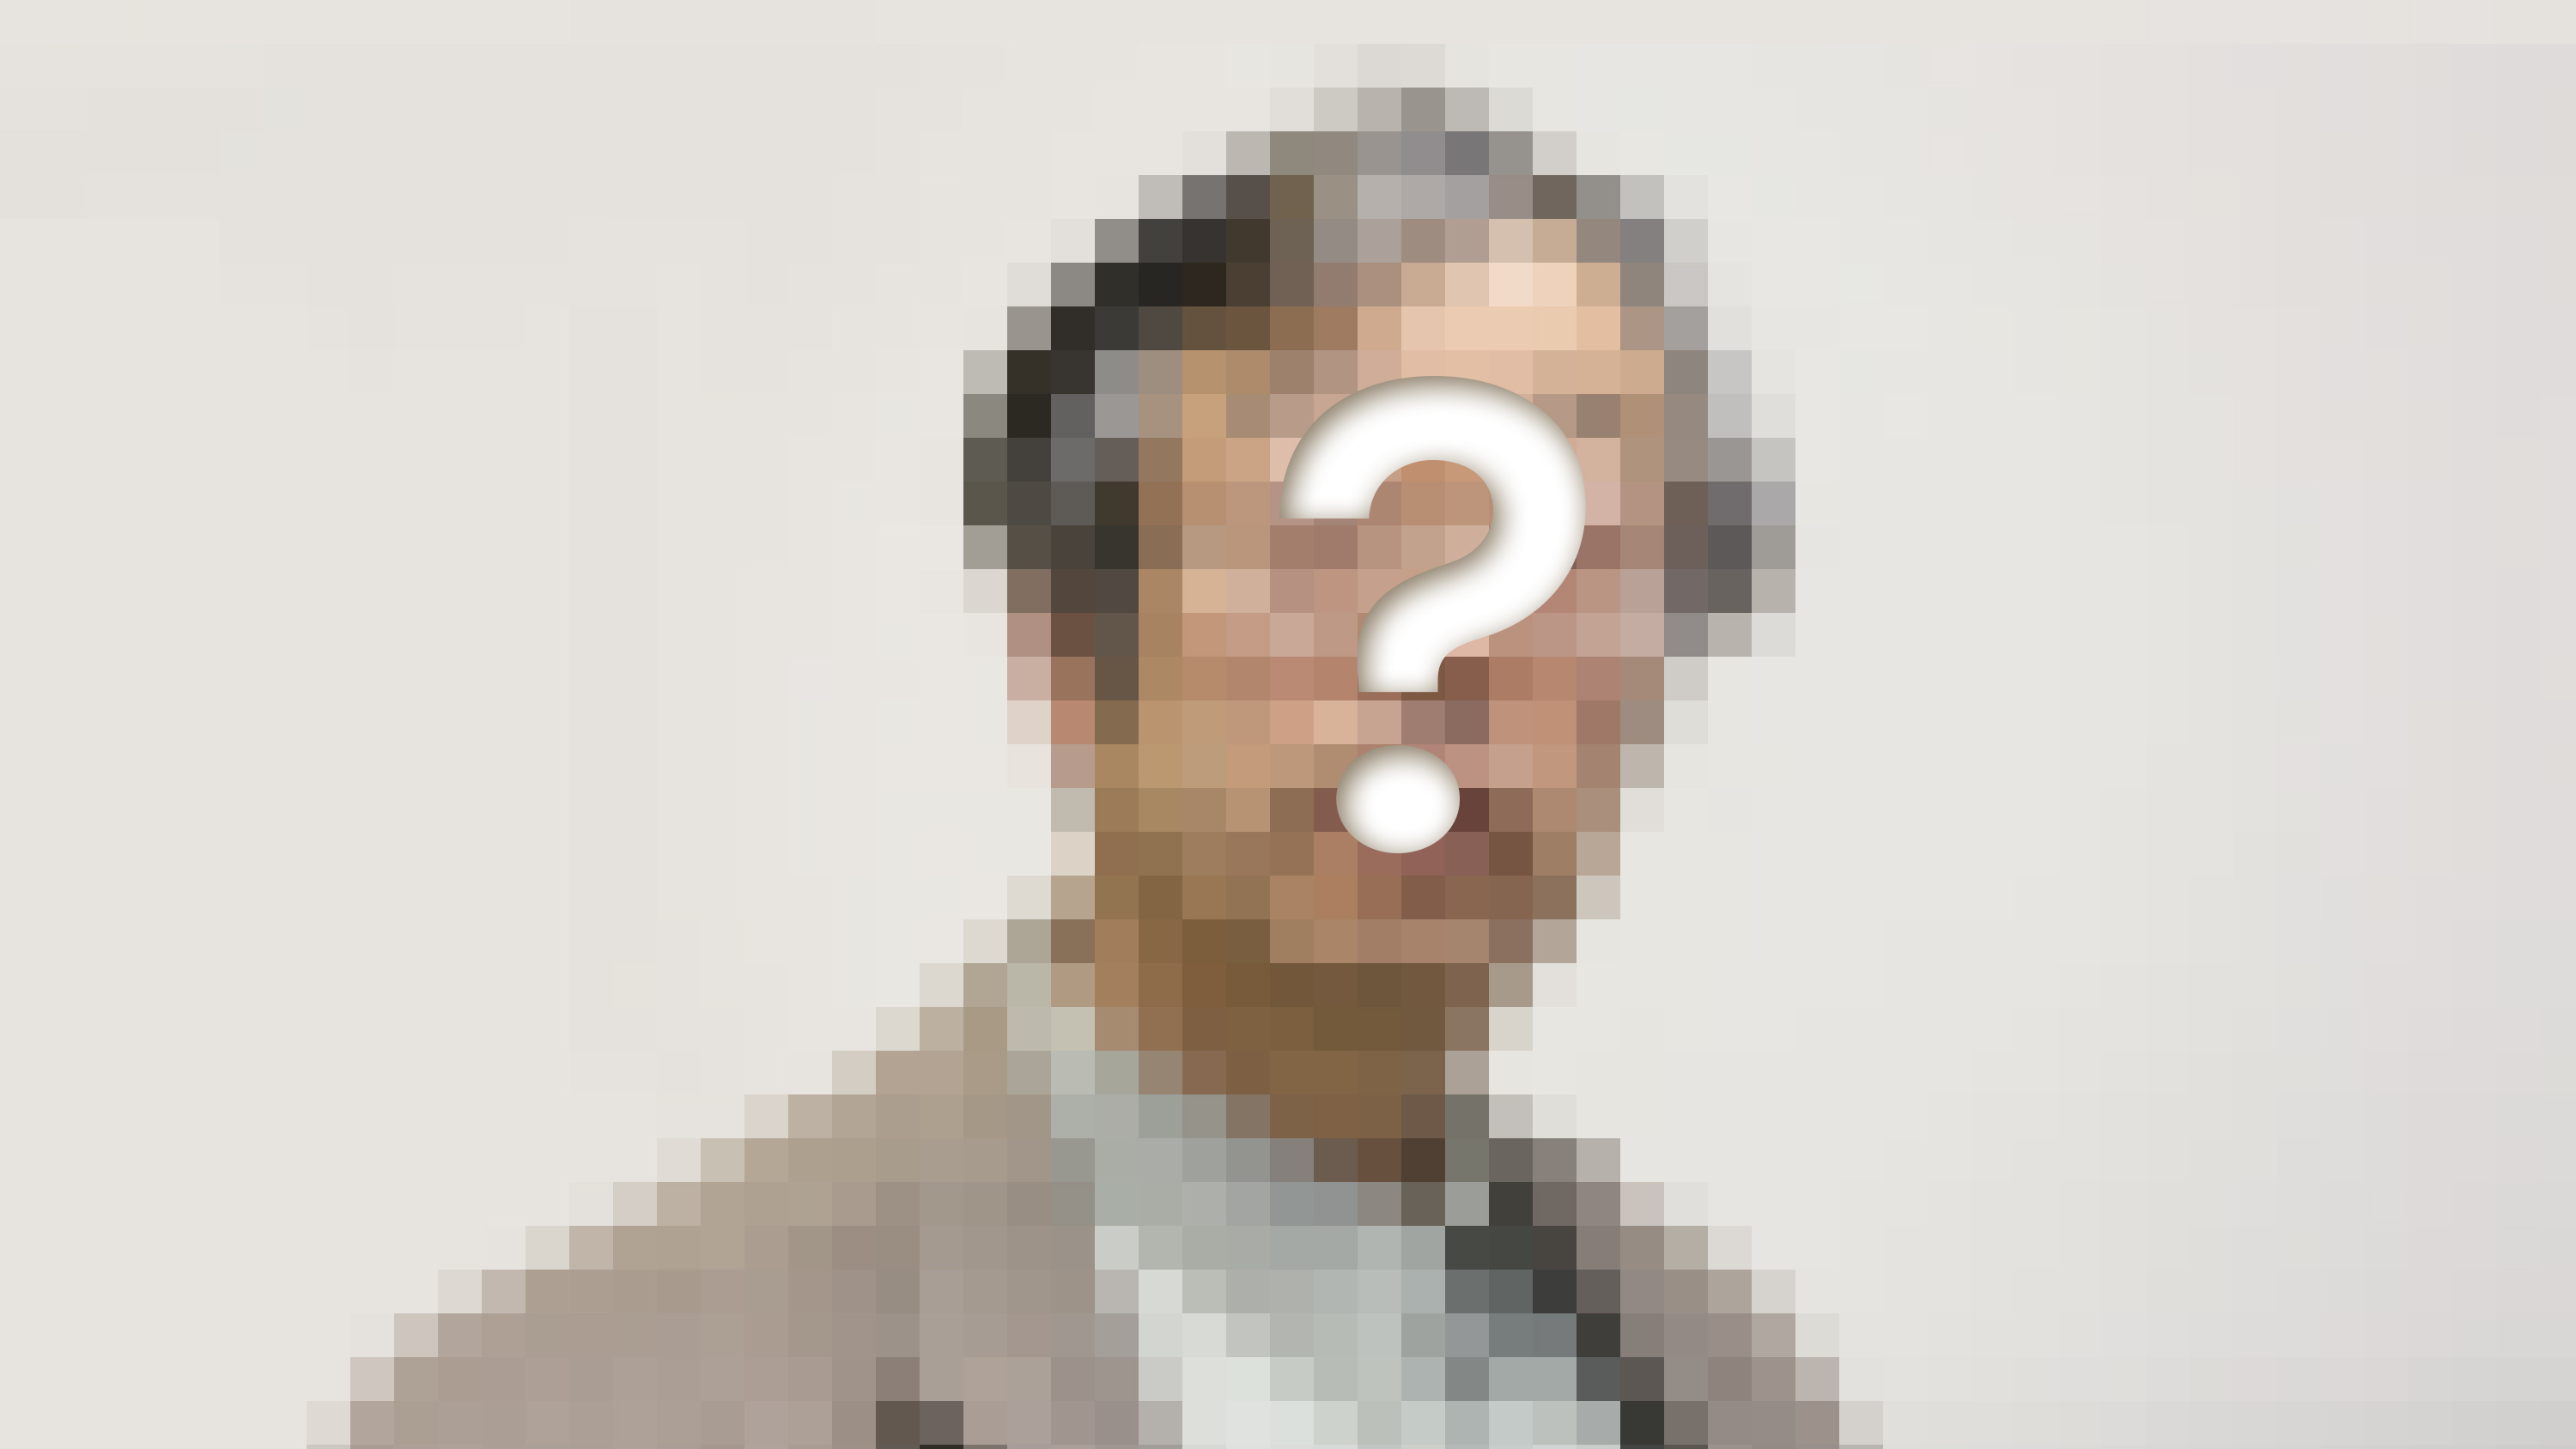 pixelated photograph of man with graying hair and tan blazer with question mark superimposed over the man's face